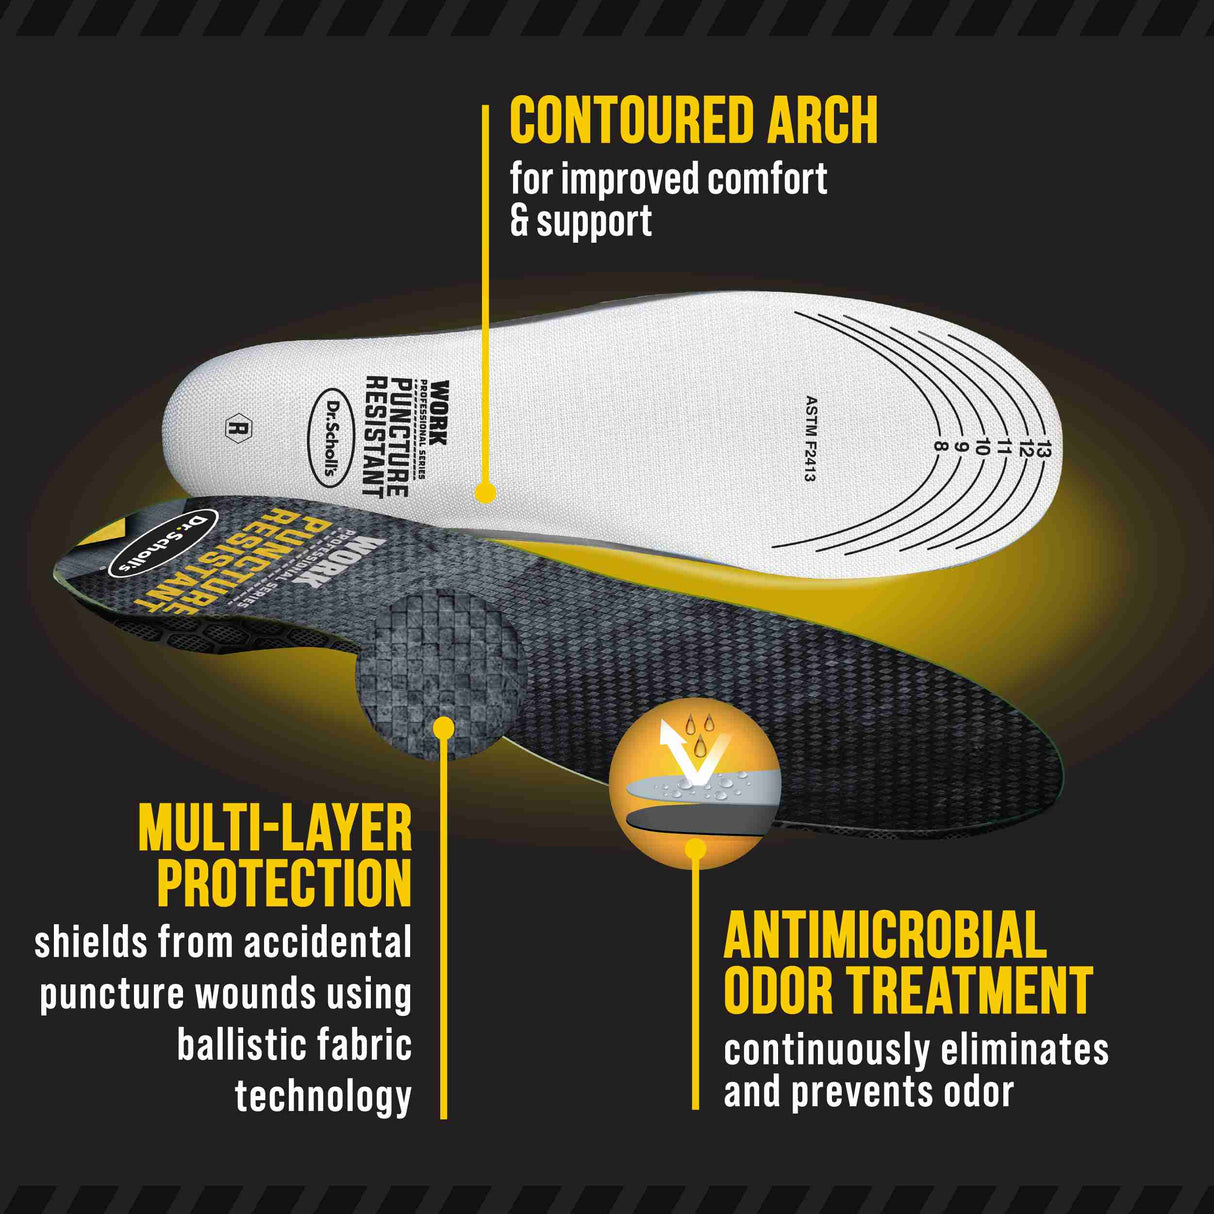 image of top and bottom of puncture resistant insoles with text: Contoured Arch, Multi-Layer Protection, Anti-Microbial Odor Treatment